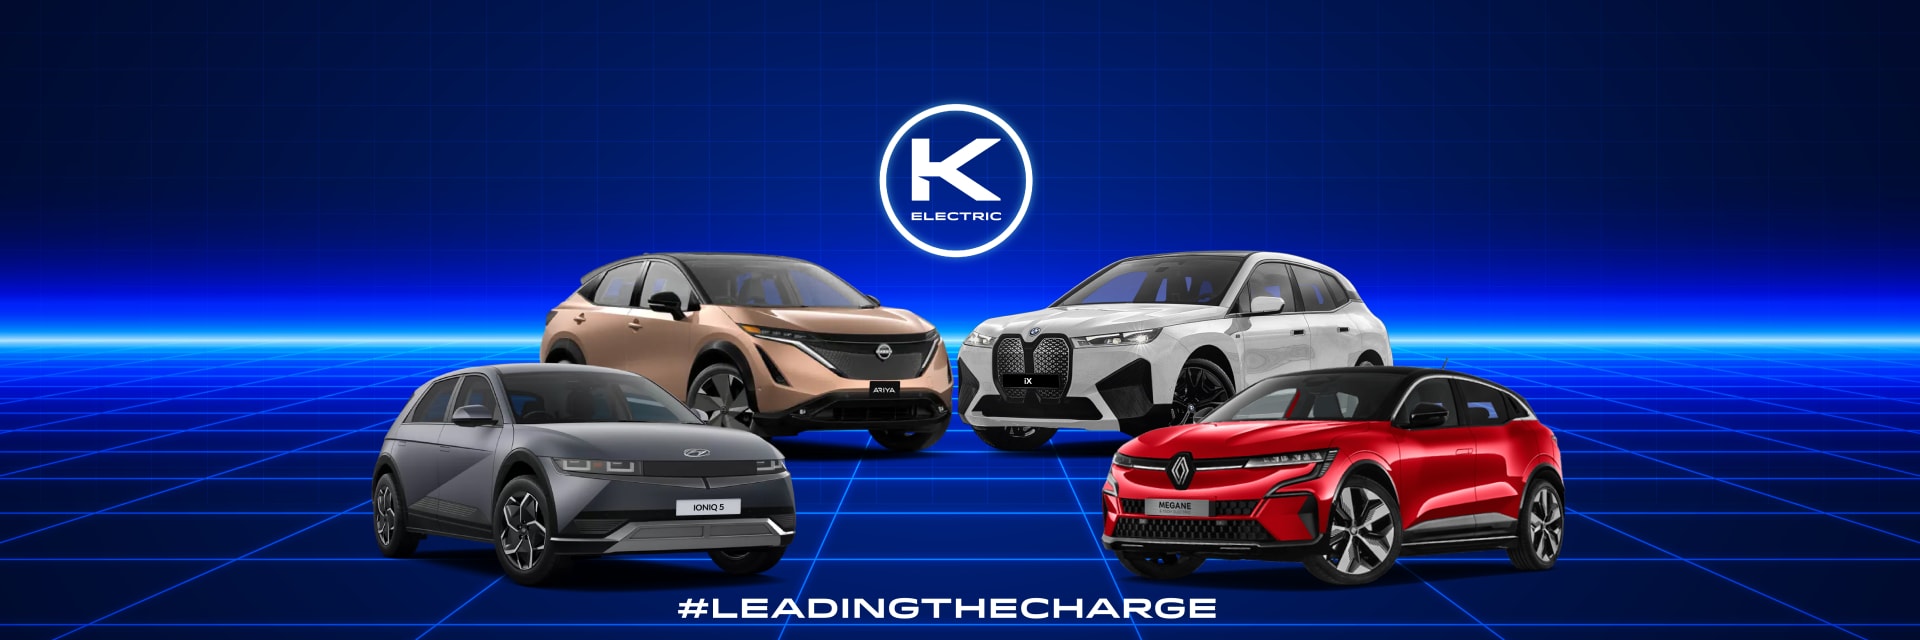 Kearys Electric Cars Buy and Drive guide